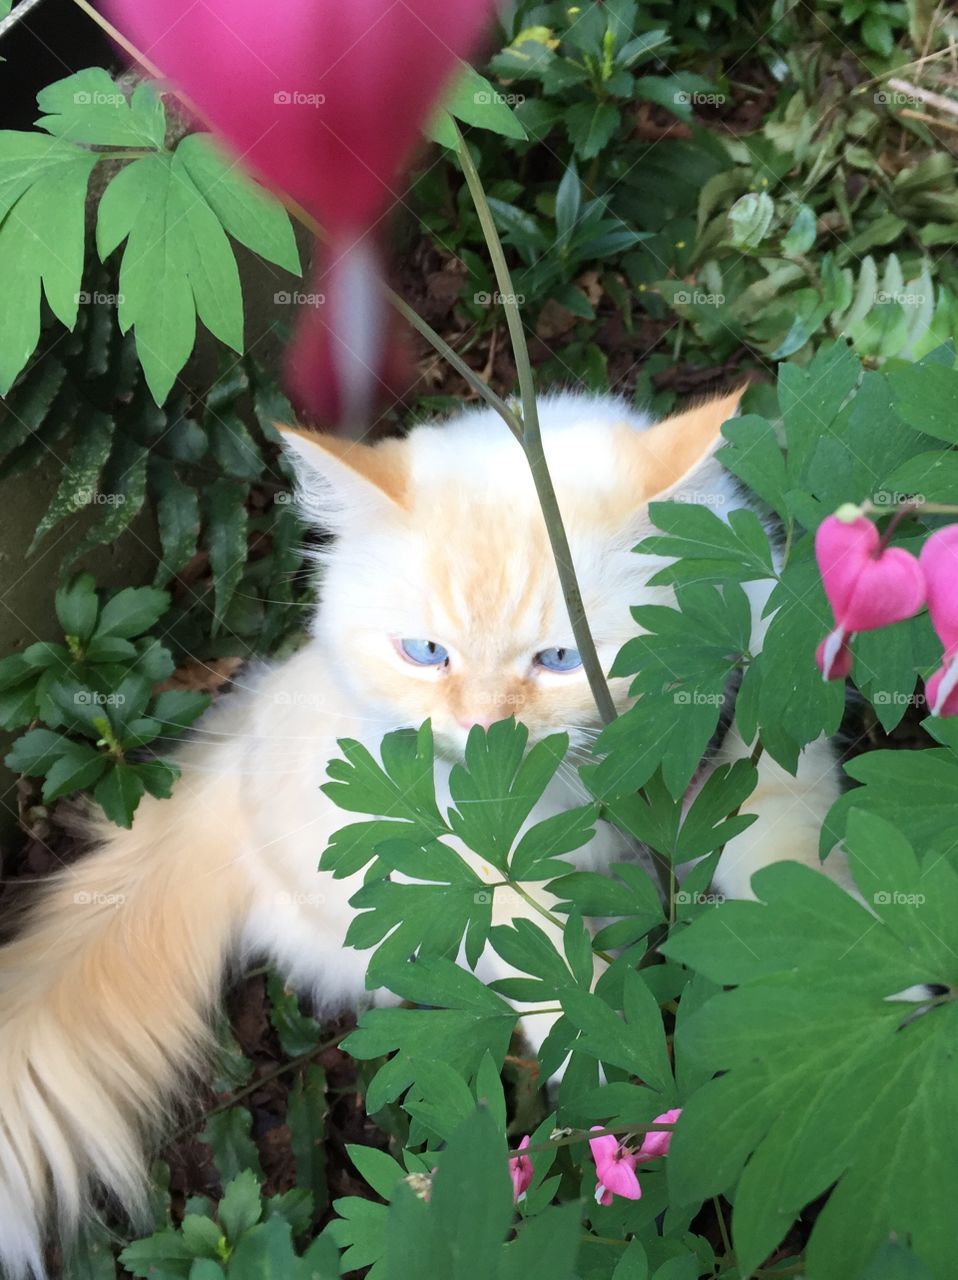 Harvey has a very curious nature and loves to be out in the garden with me all the time 